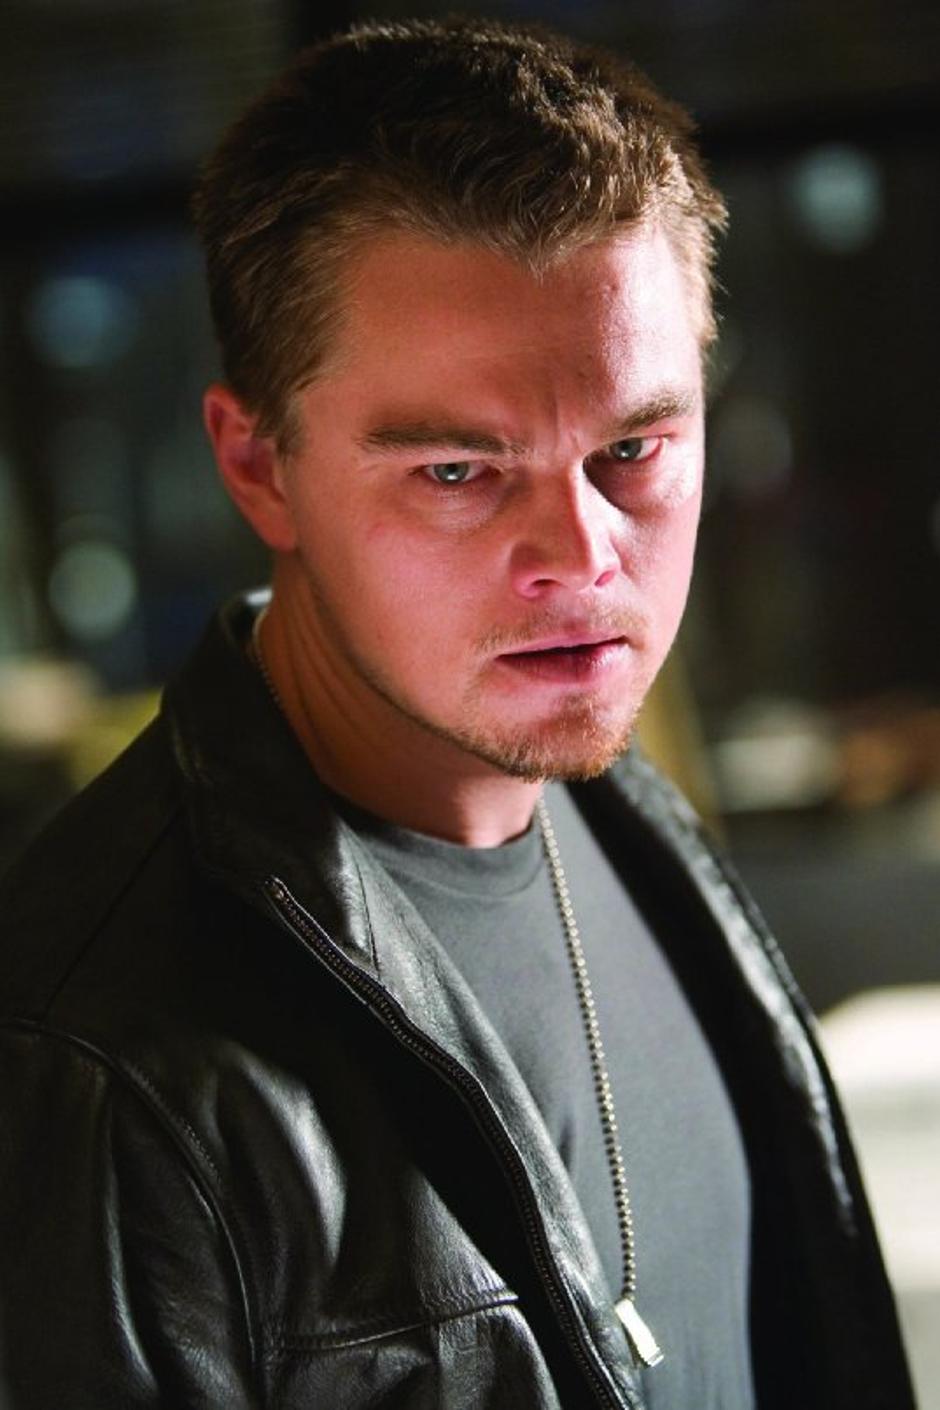 The departed | Author: Warner Bros